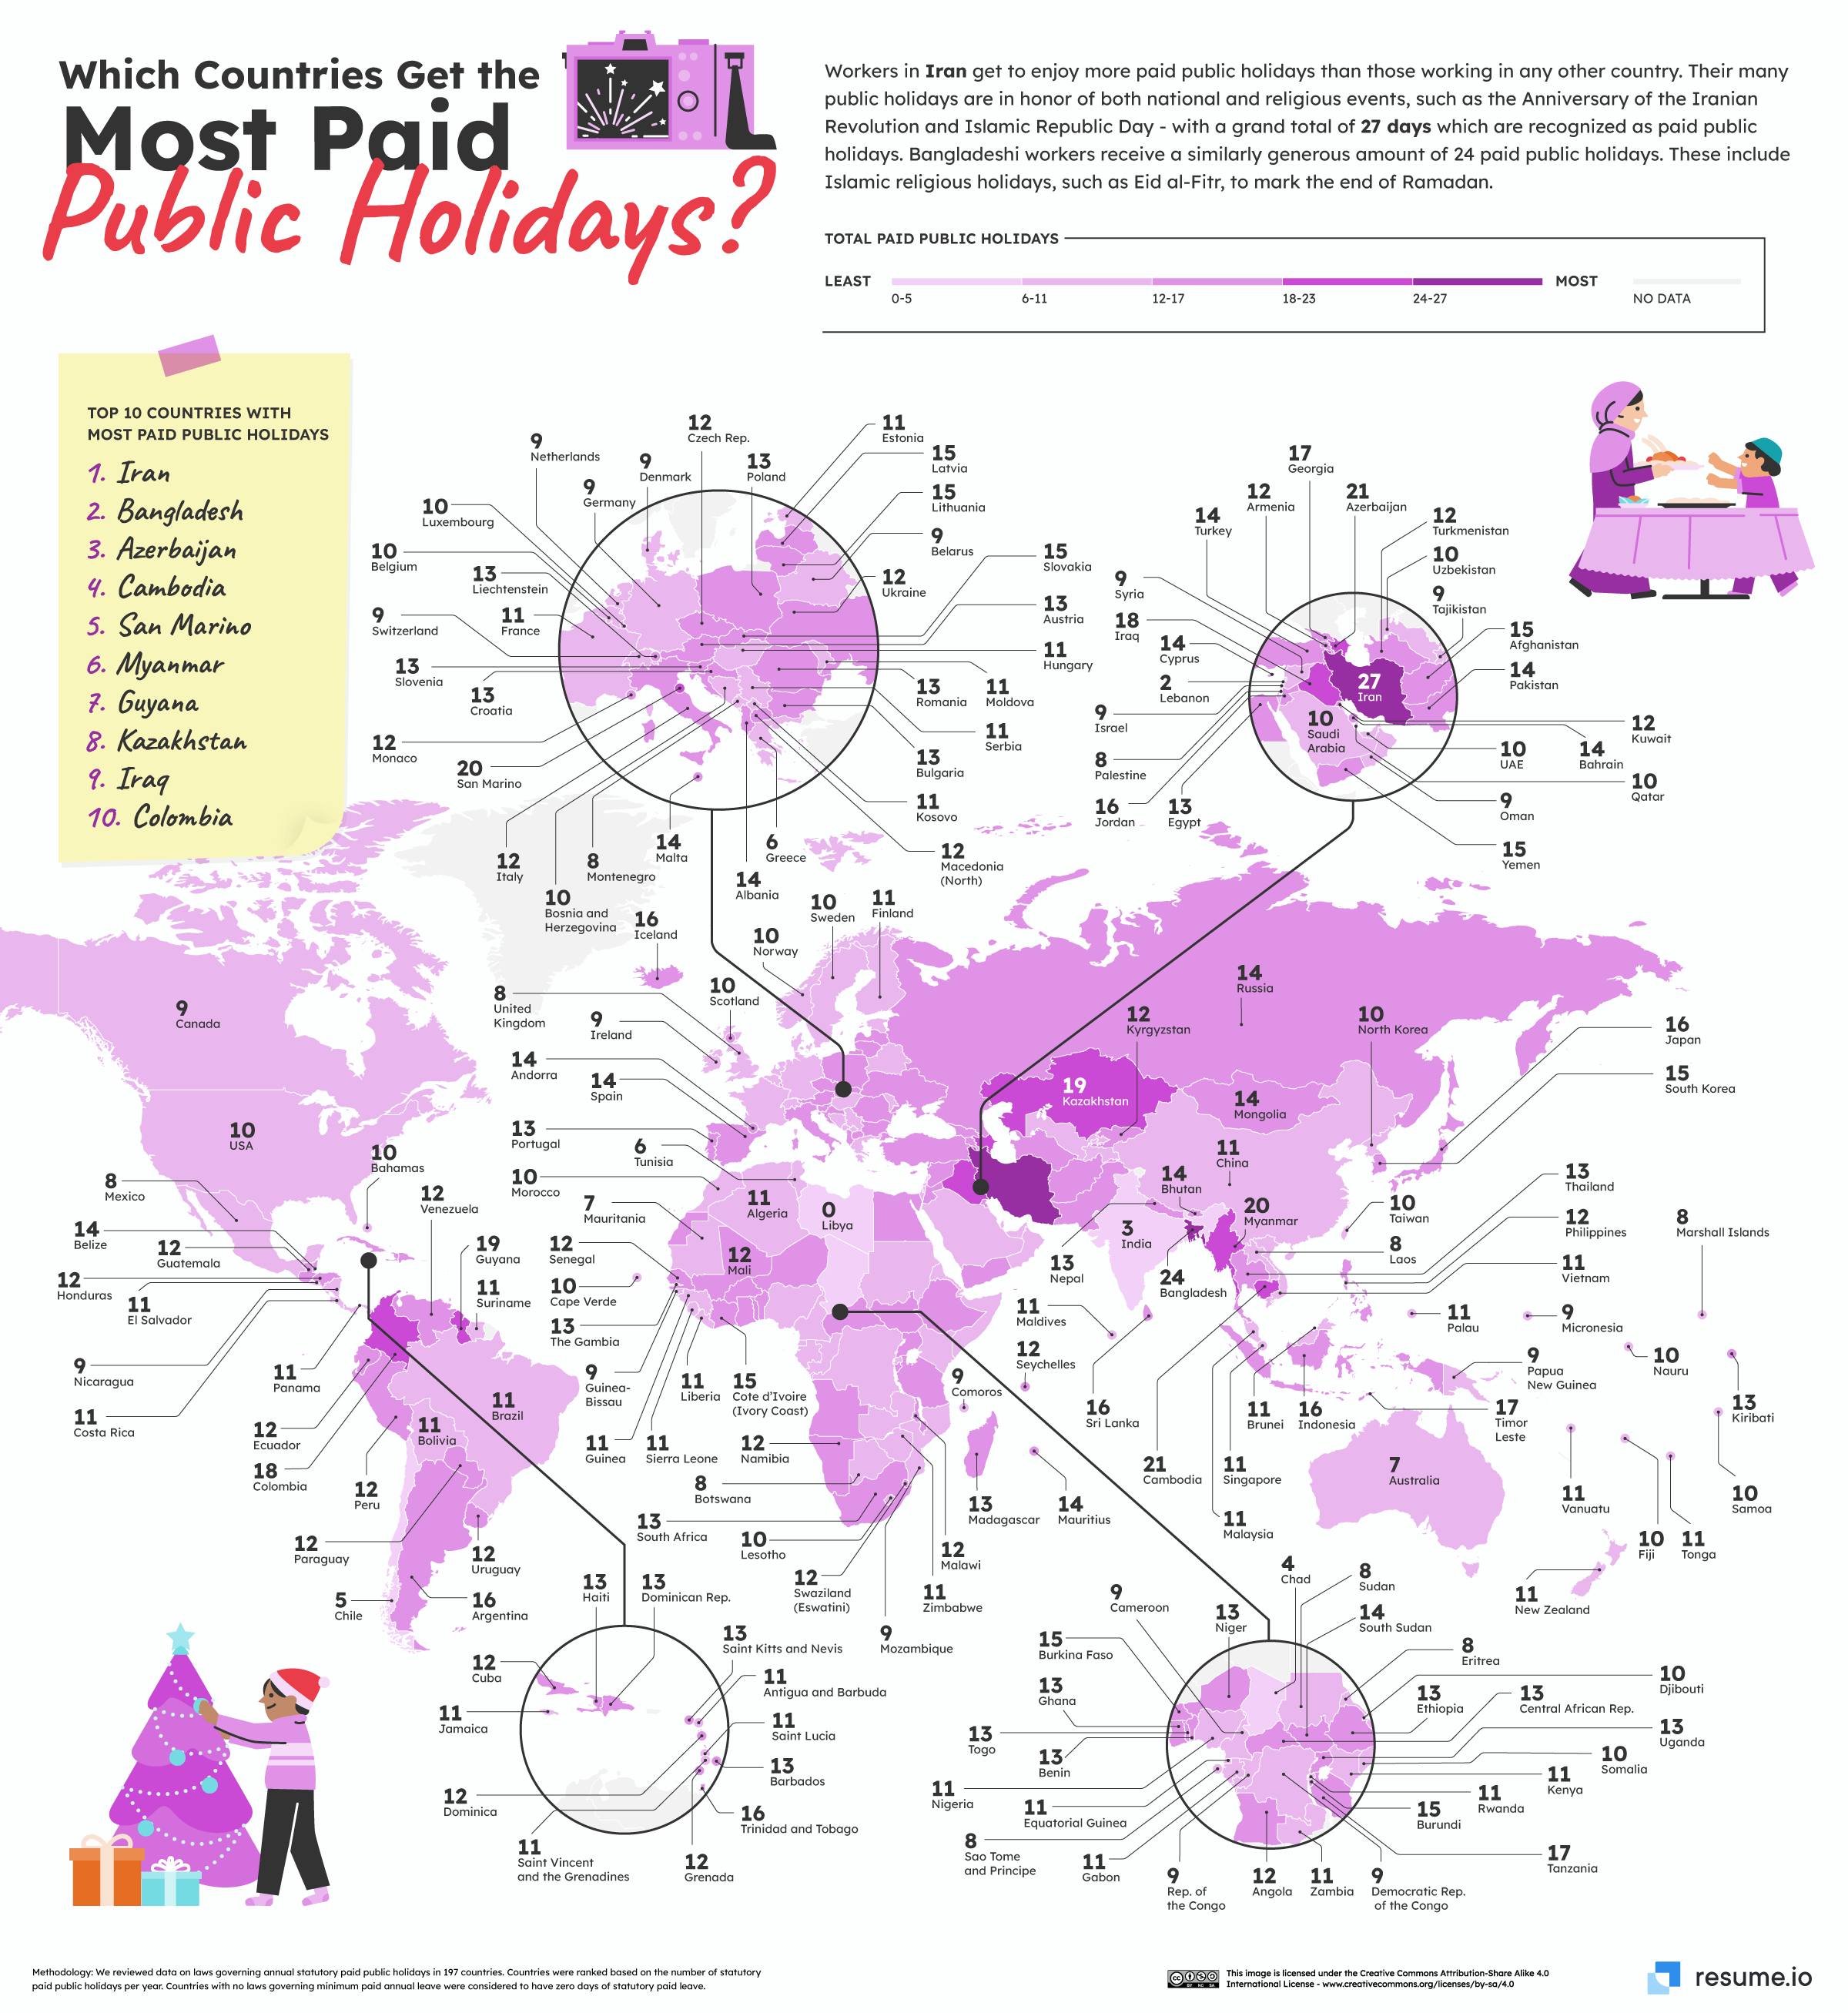 Which Countries Get the Most Paid Public Holidays?